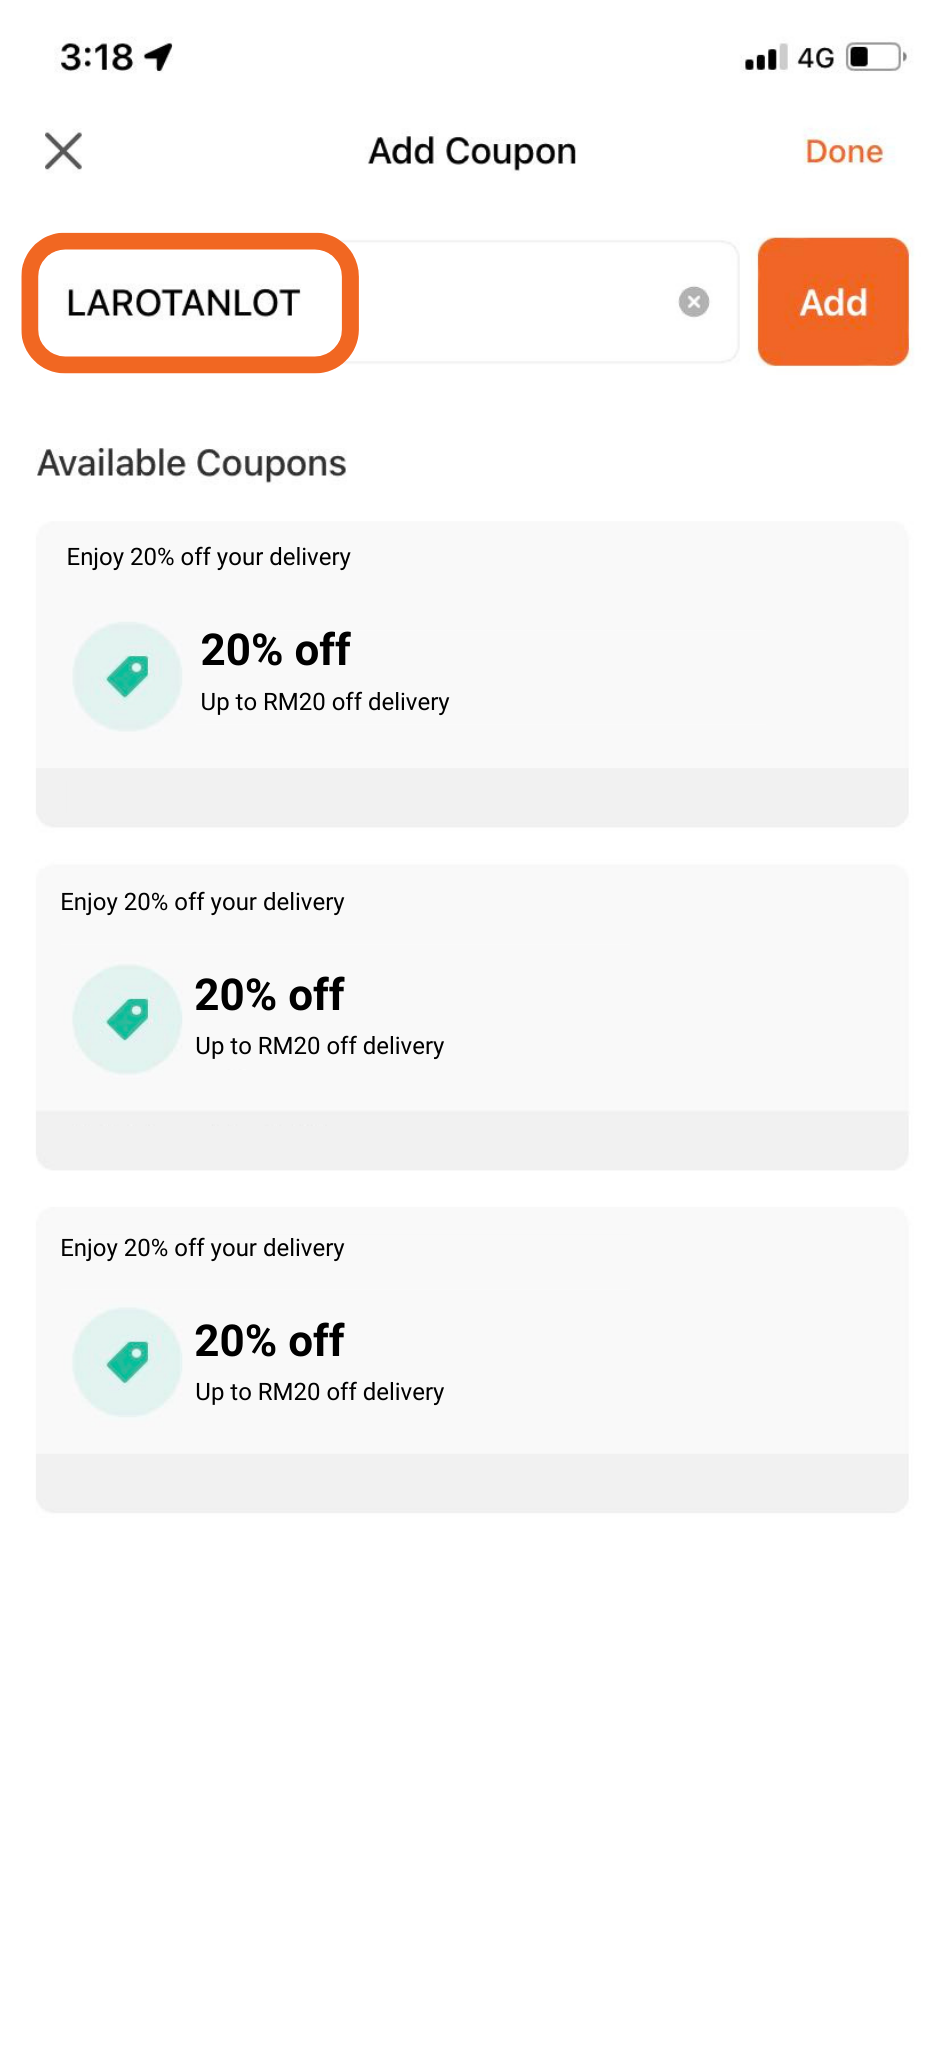 screenshot of user using LAROTANLOT for coupon code to get 20% off deliveries with lalamove